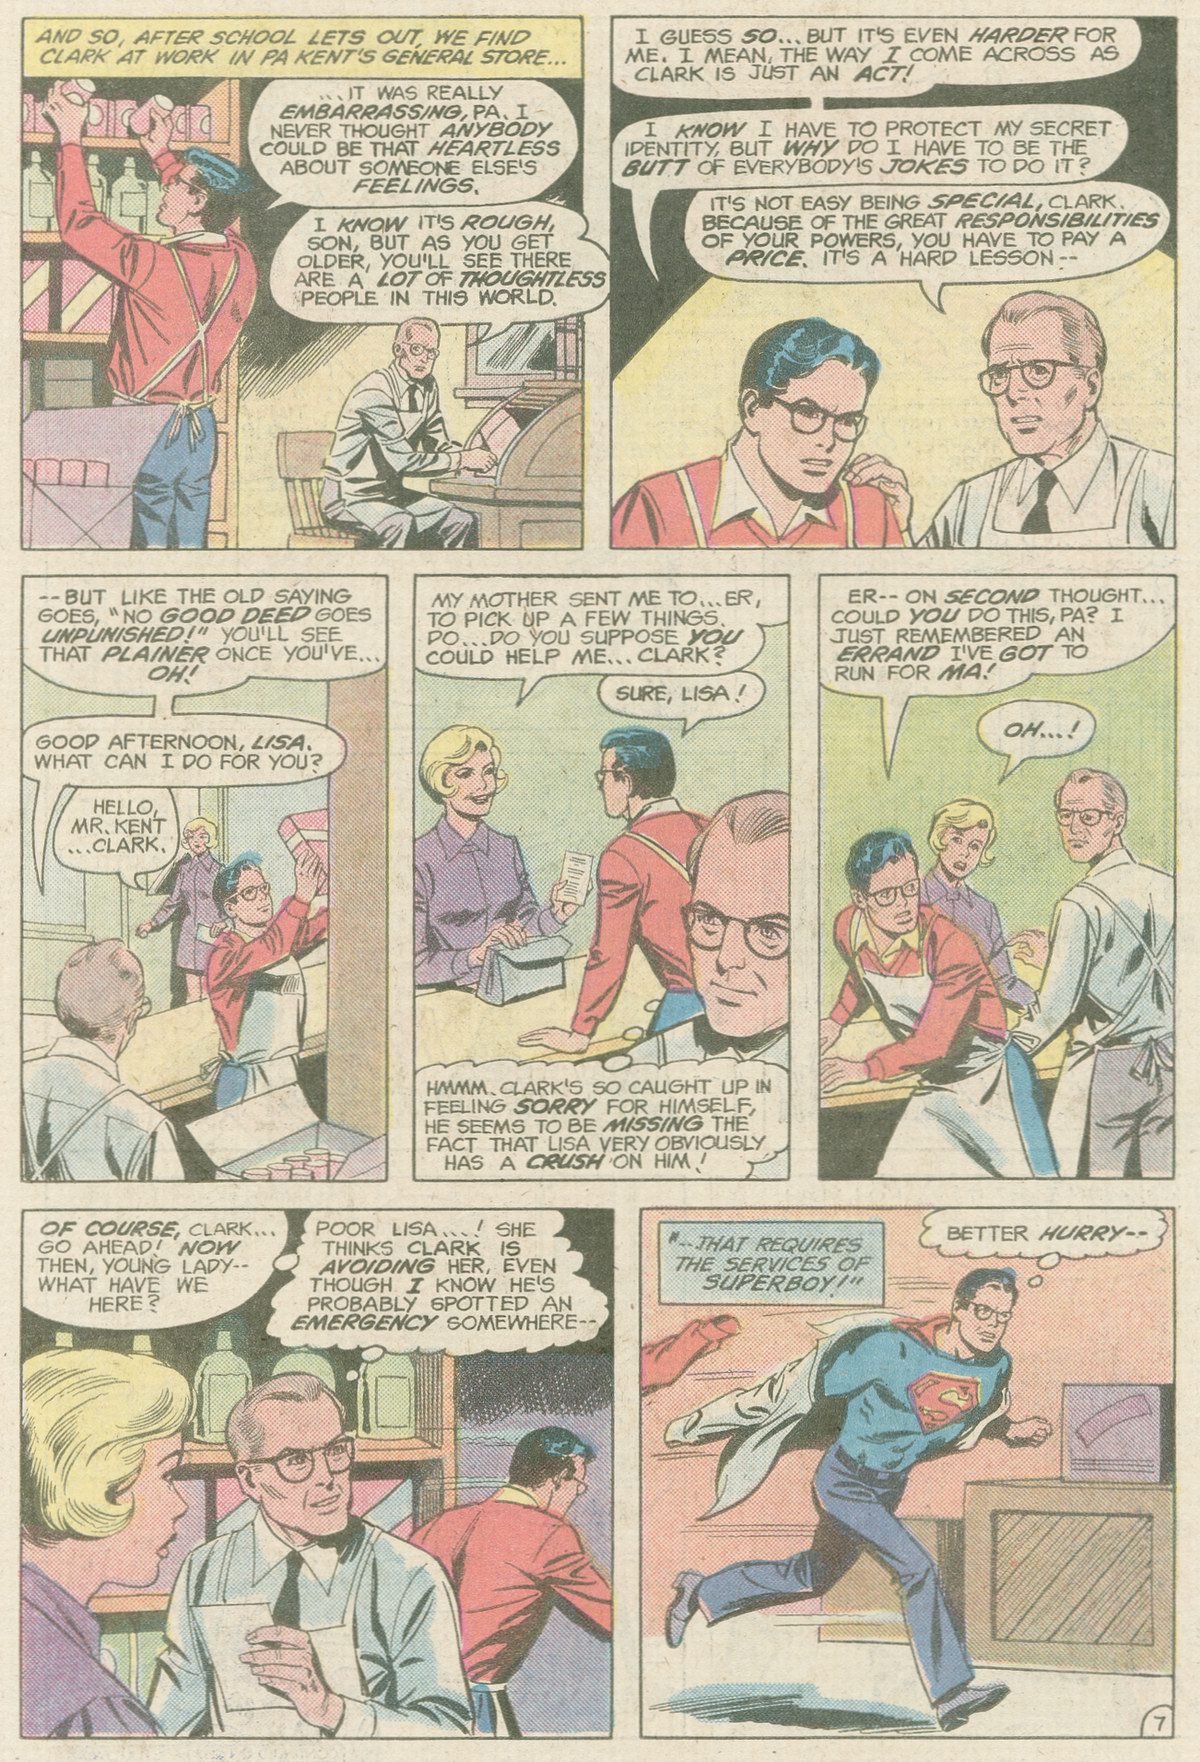 The New Adventures of Superboy 40 Page 7